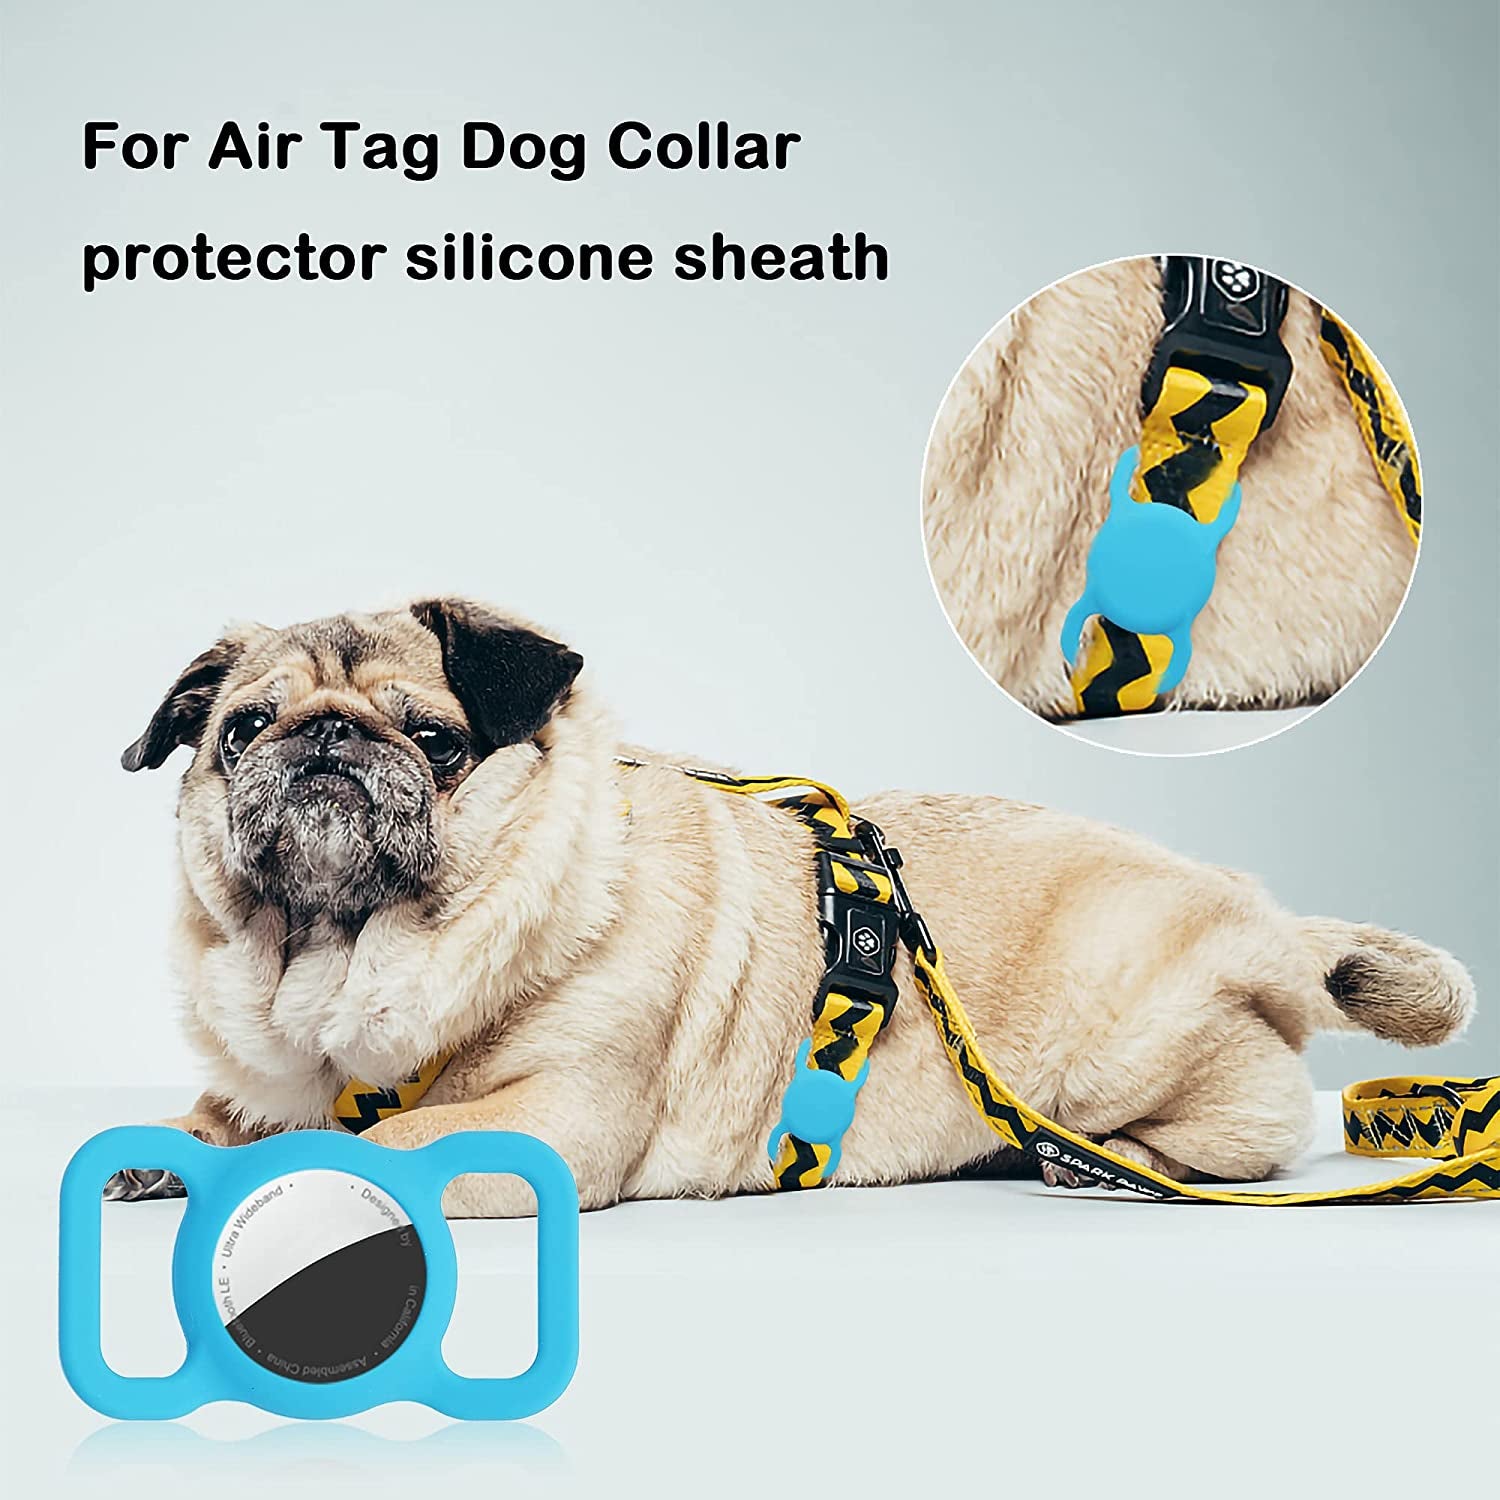 Air Tag Dog Collar Holder Compatible with Apple Airtag Case 4 Pack, LDHTY Air Tag Holder Accessories, Airtags Protective Cover Silicone for Dogs Cat Pet Collar Backpacks, Black/Blue/Purple/Pink